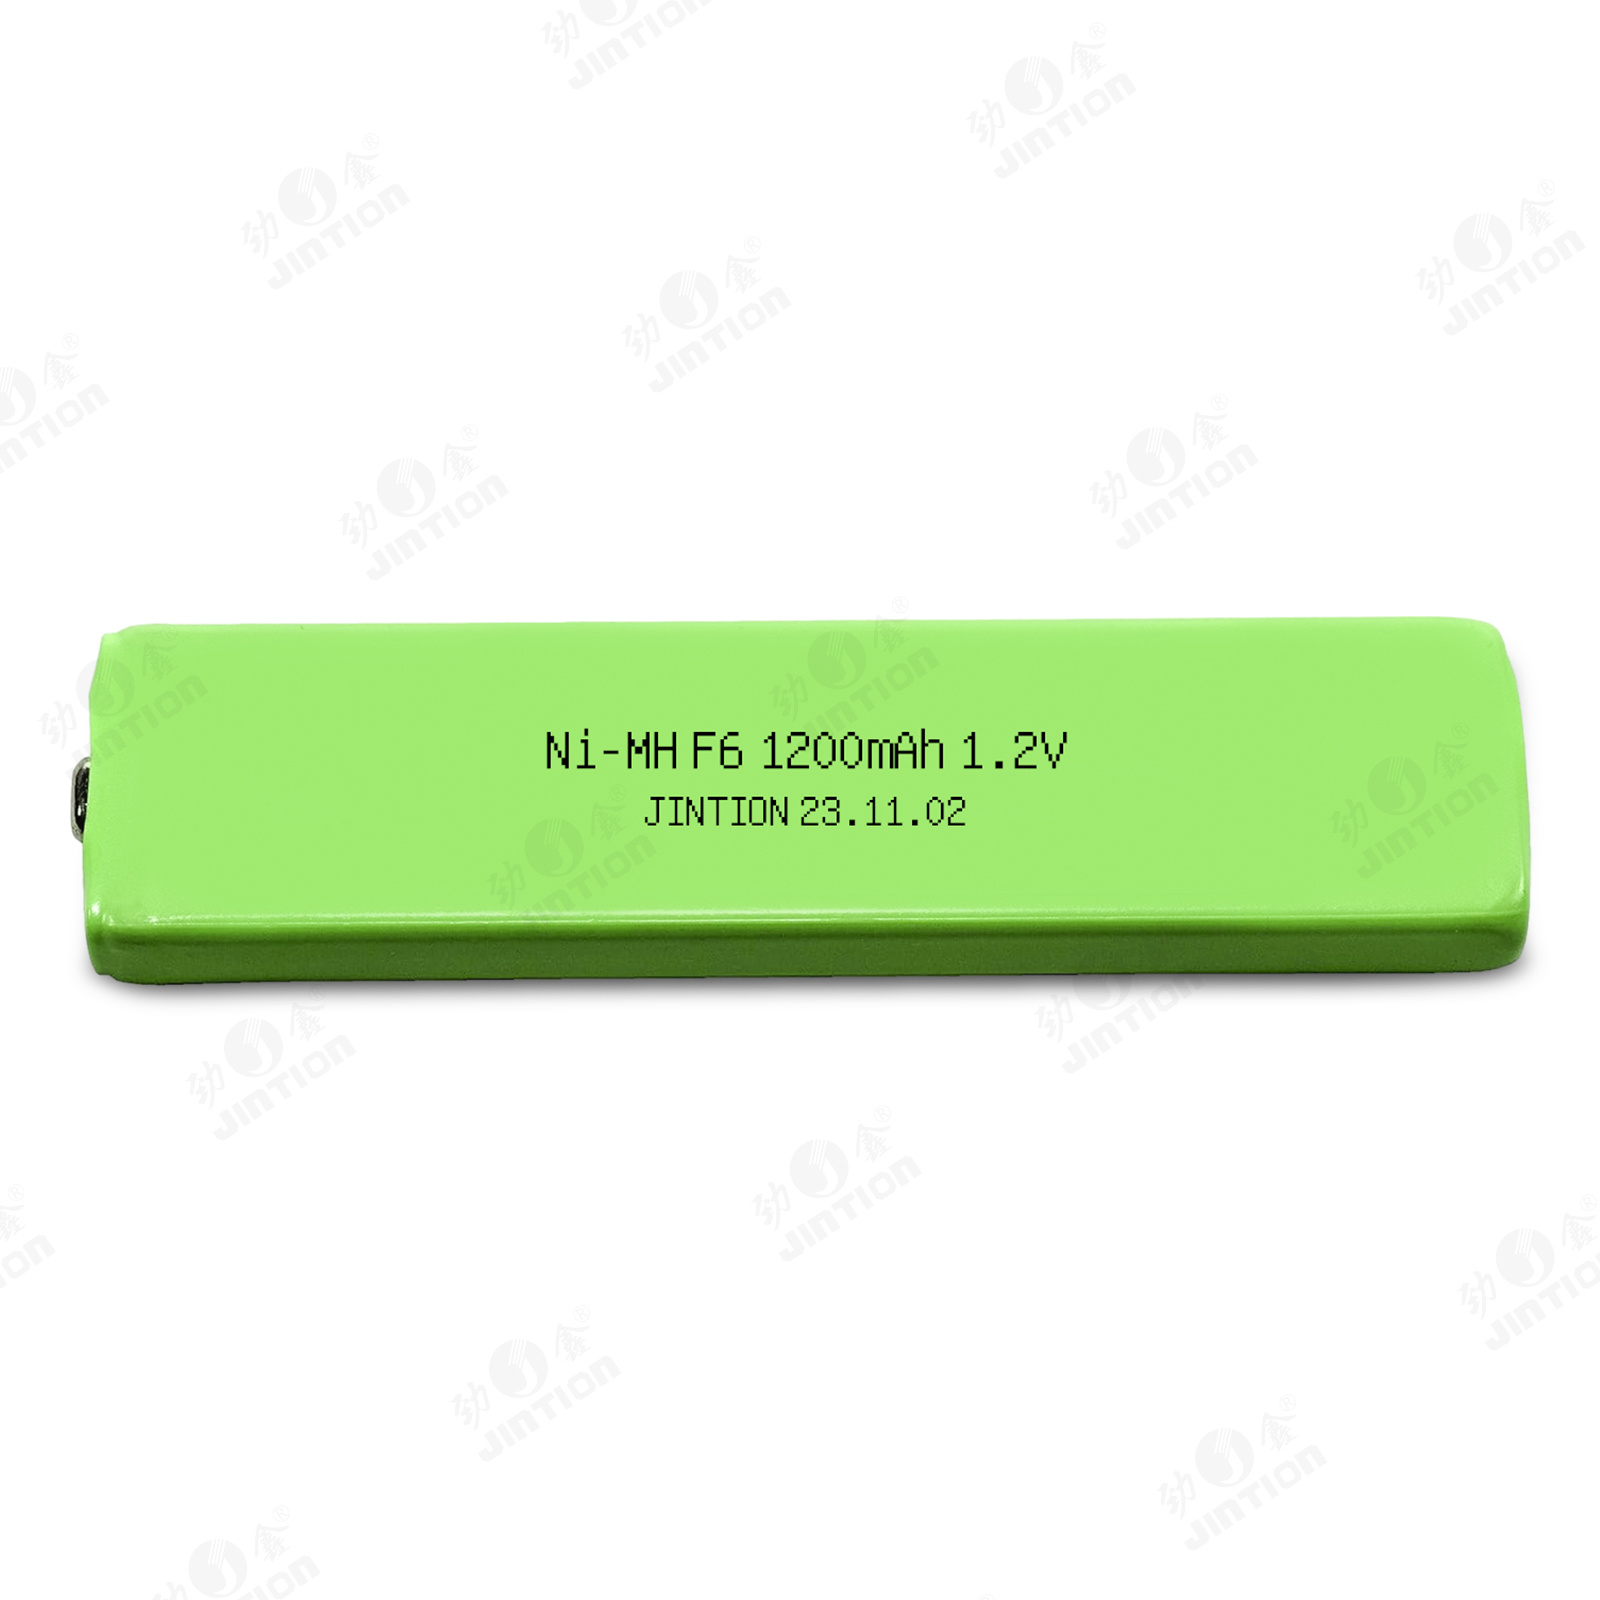 NIMH F6 1200mah 1.2V rechargeable battery nimh batteries Chewing Gum battery For Sony NC-5WM NC-6WM 701C 1RX707 F100 FX675